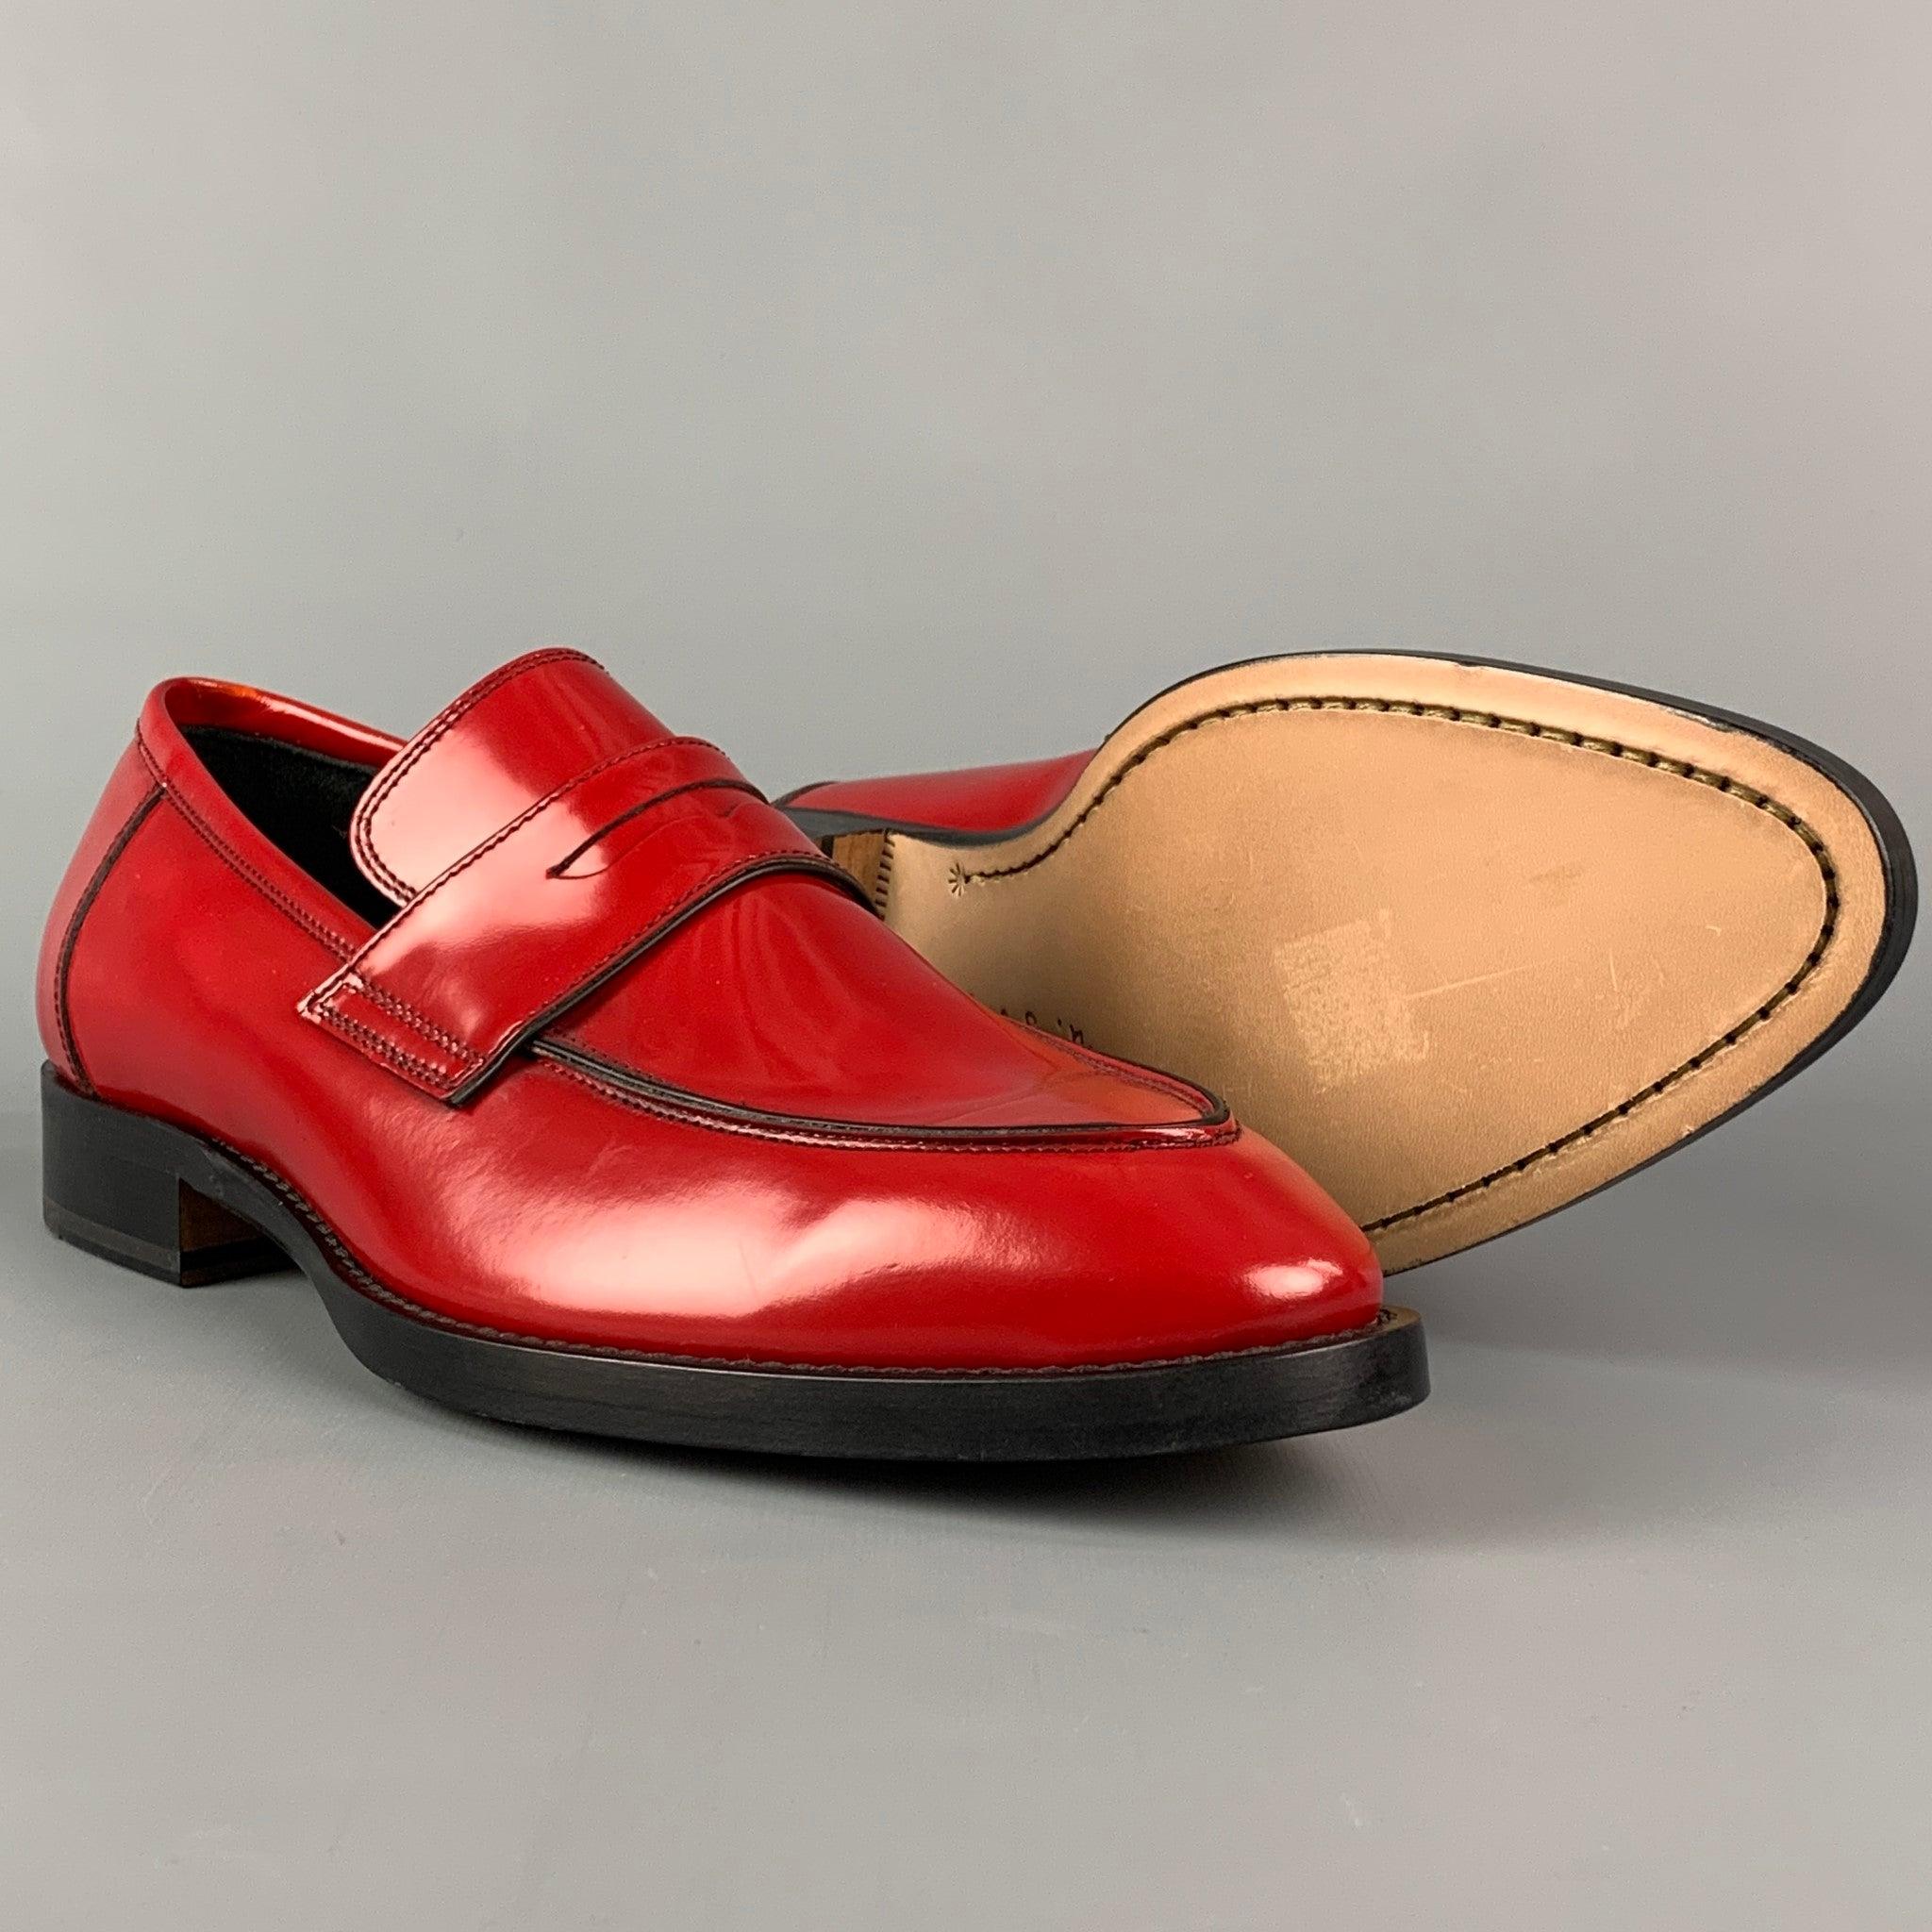 PAUL SMITH Size 8 Red Leather Slip On Loafers In Good Condition For Sale In San Francisco, CA